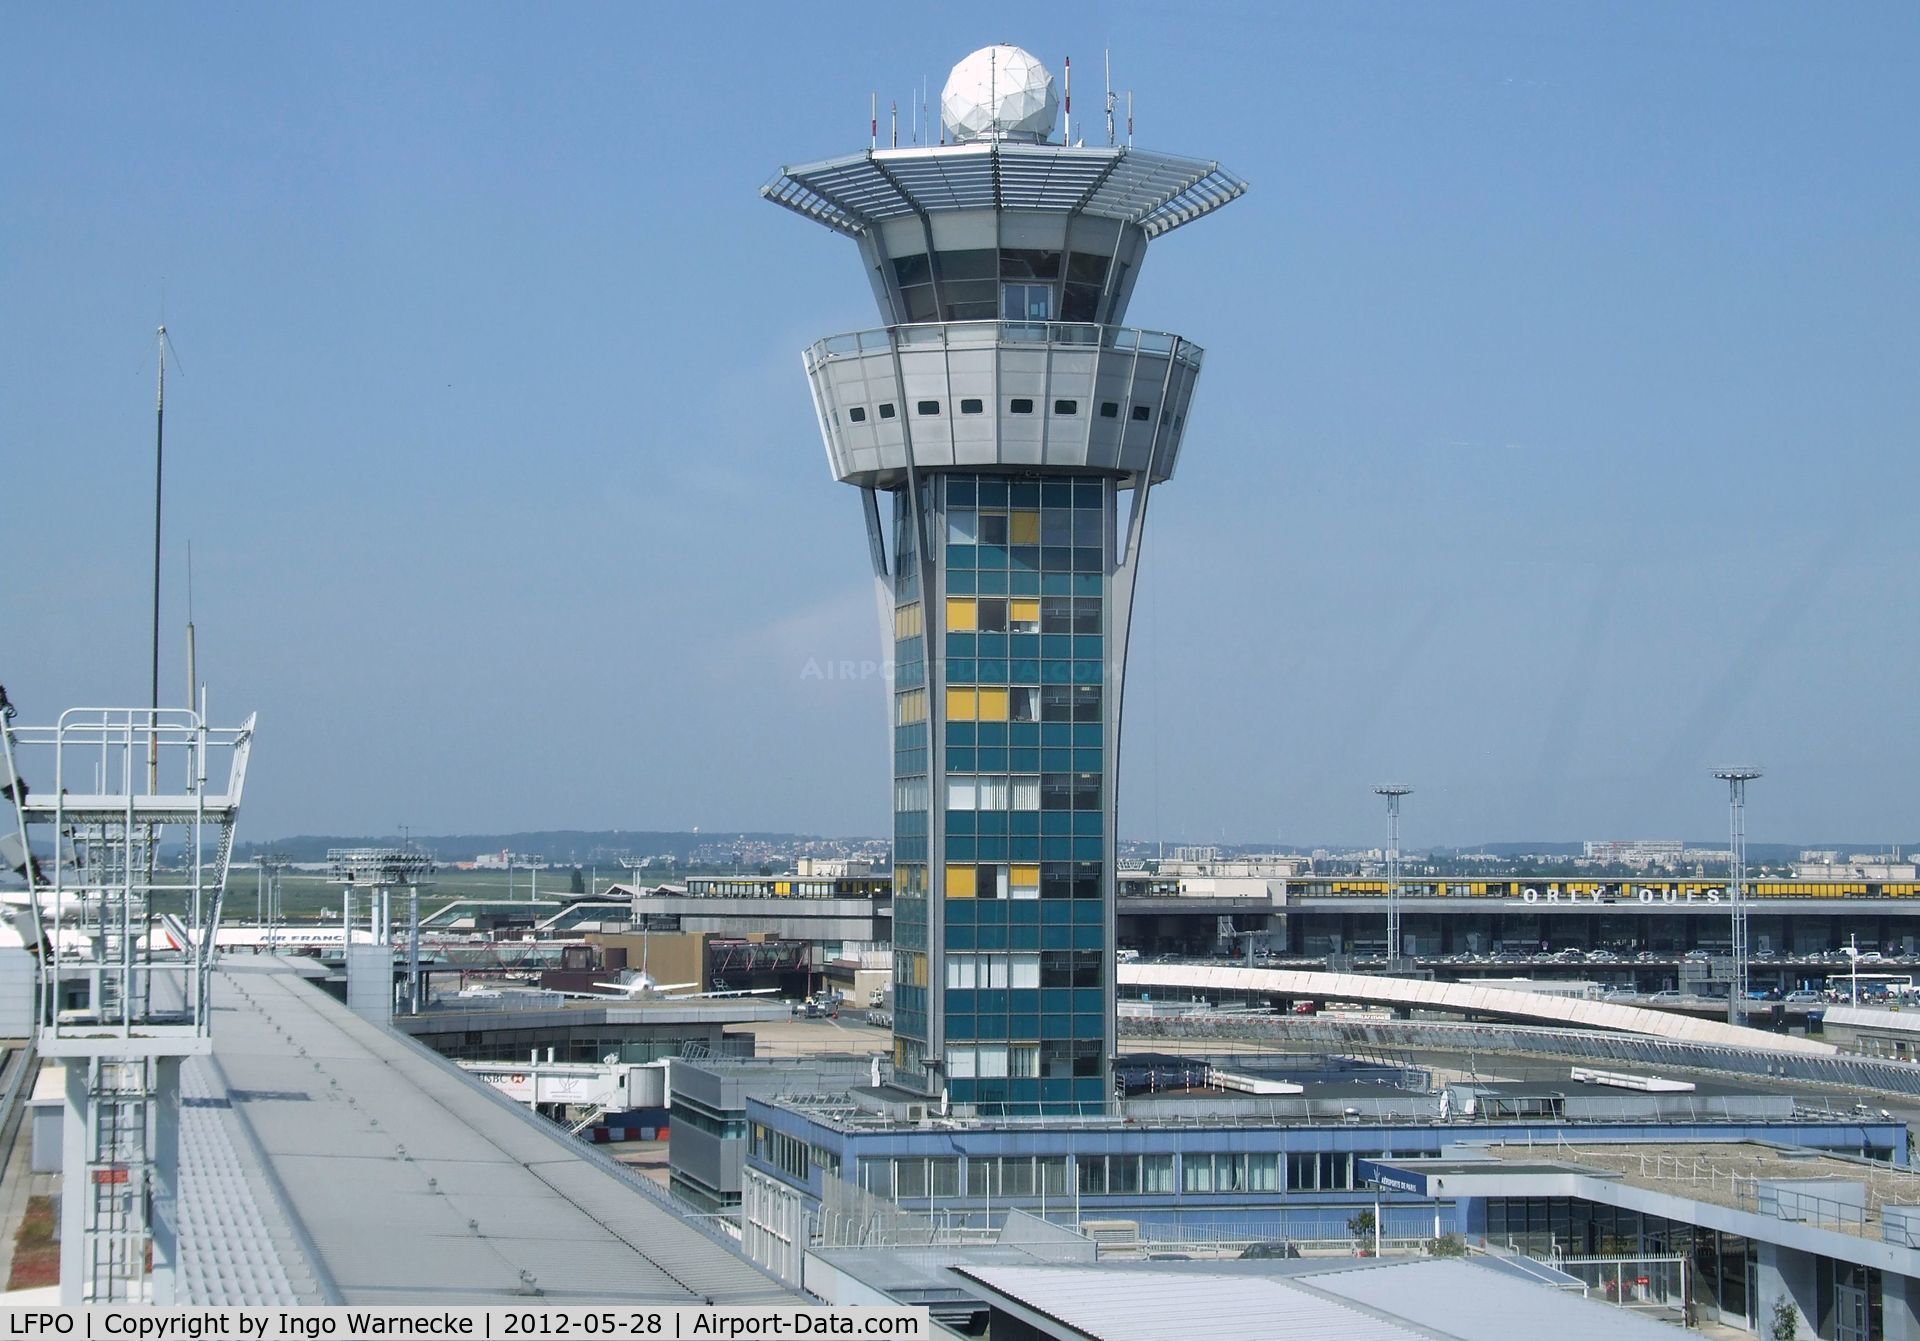 Paris Orly Airport, Orly (near Paris) France (LFPO) - the tower at Paris-Orly airport